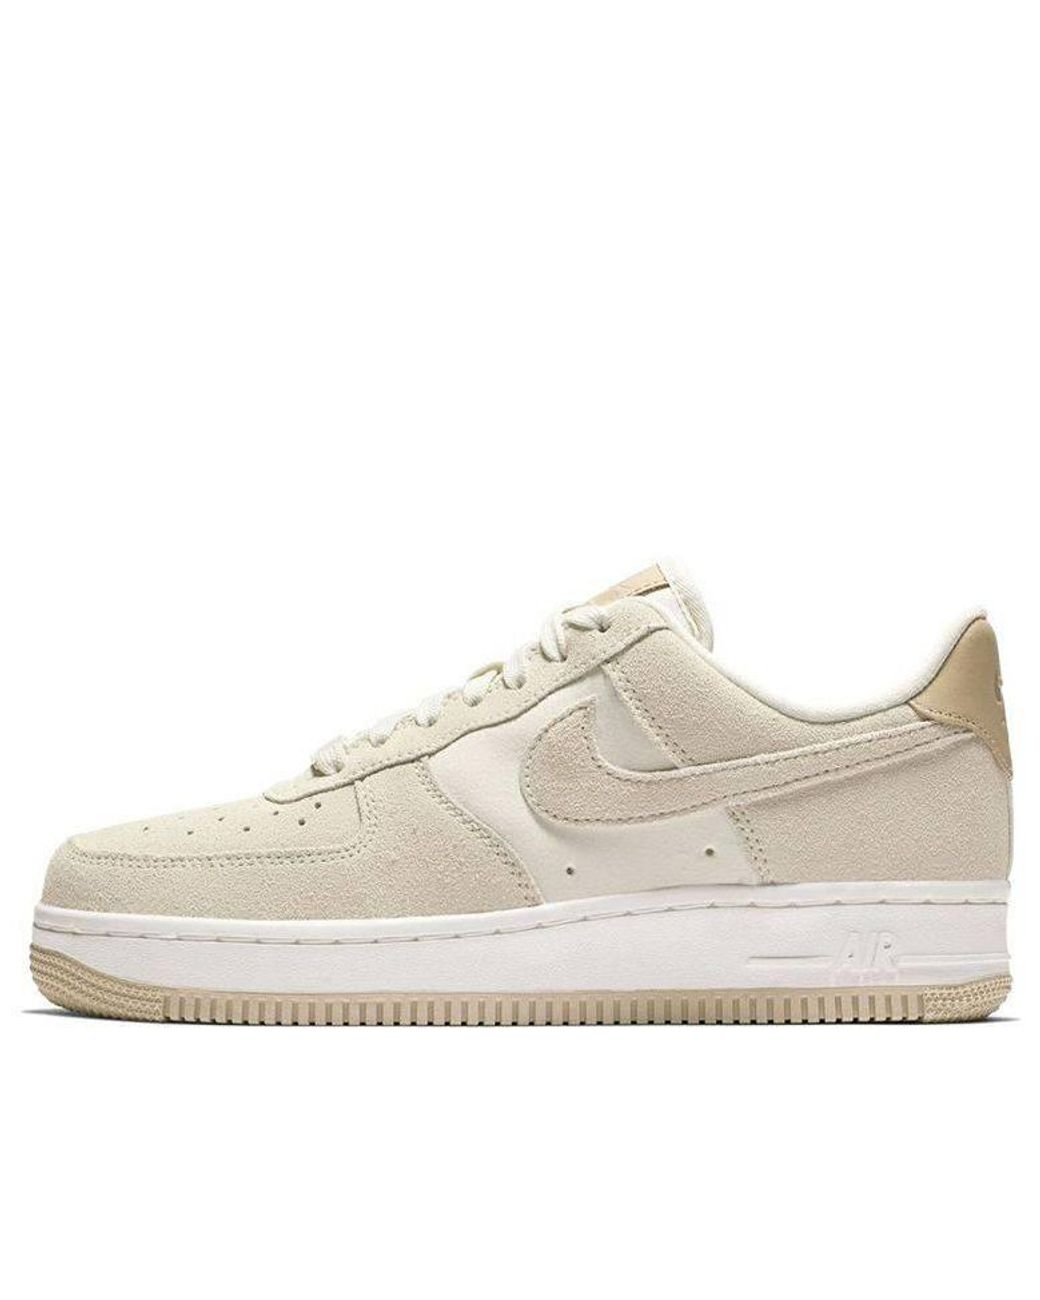 Nike Air Force 1 '0 Premium 'pale Ivory' in White | Lyst